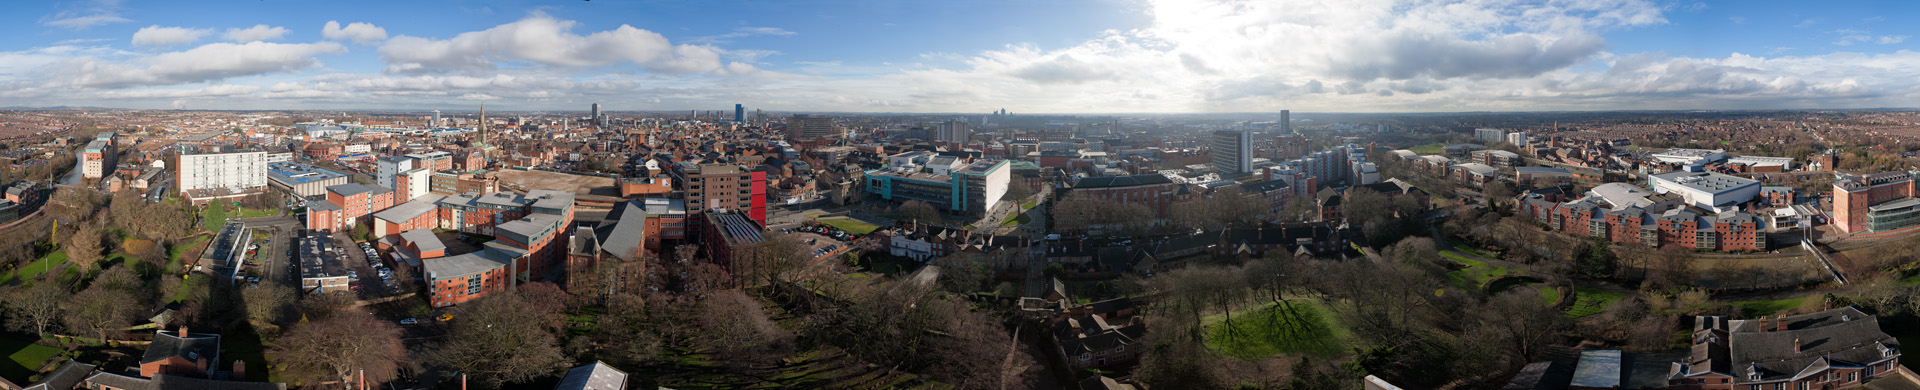 view of the city of Leicester from the very top of the spire at St Mary de Castro Church